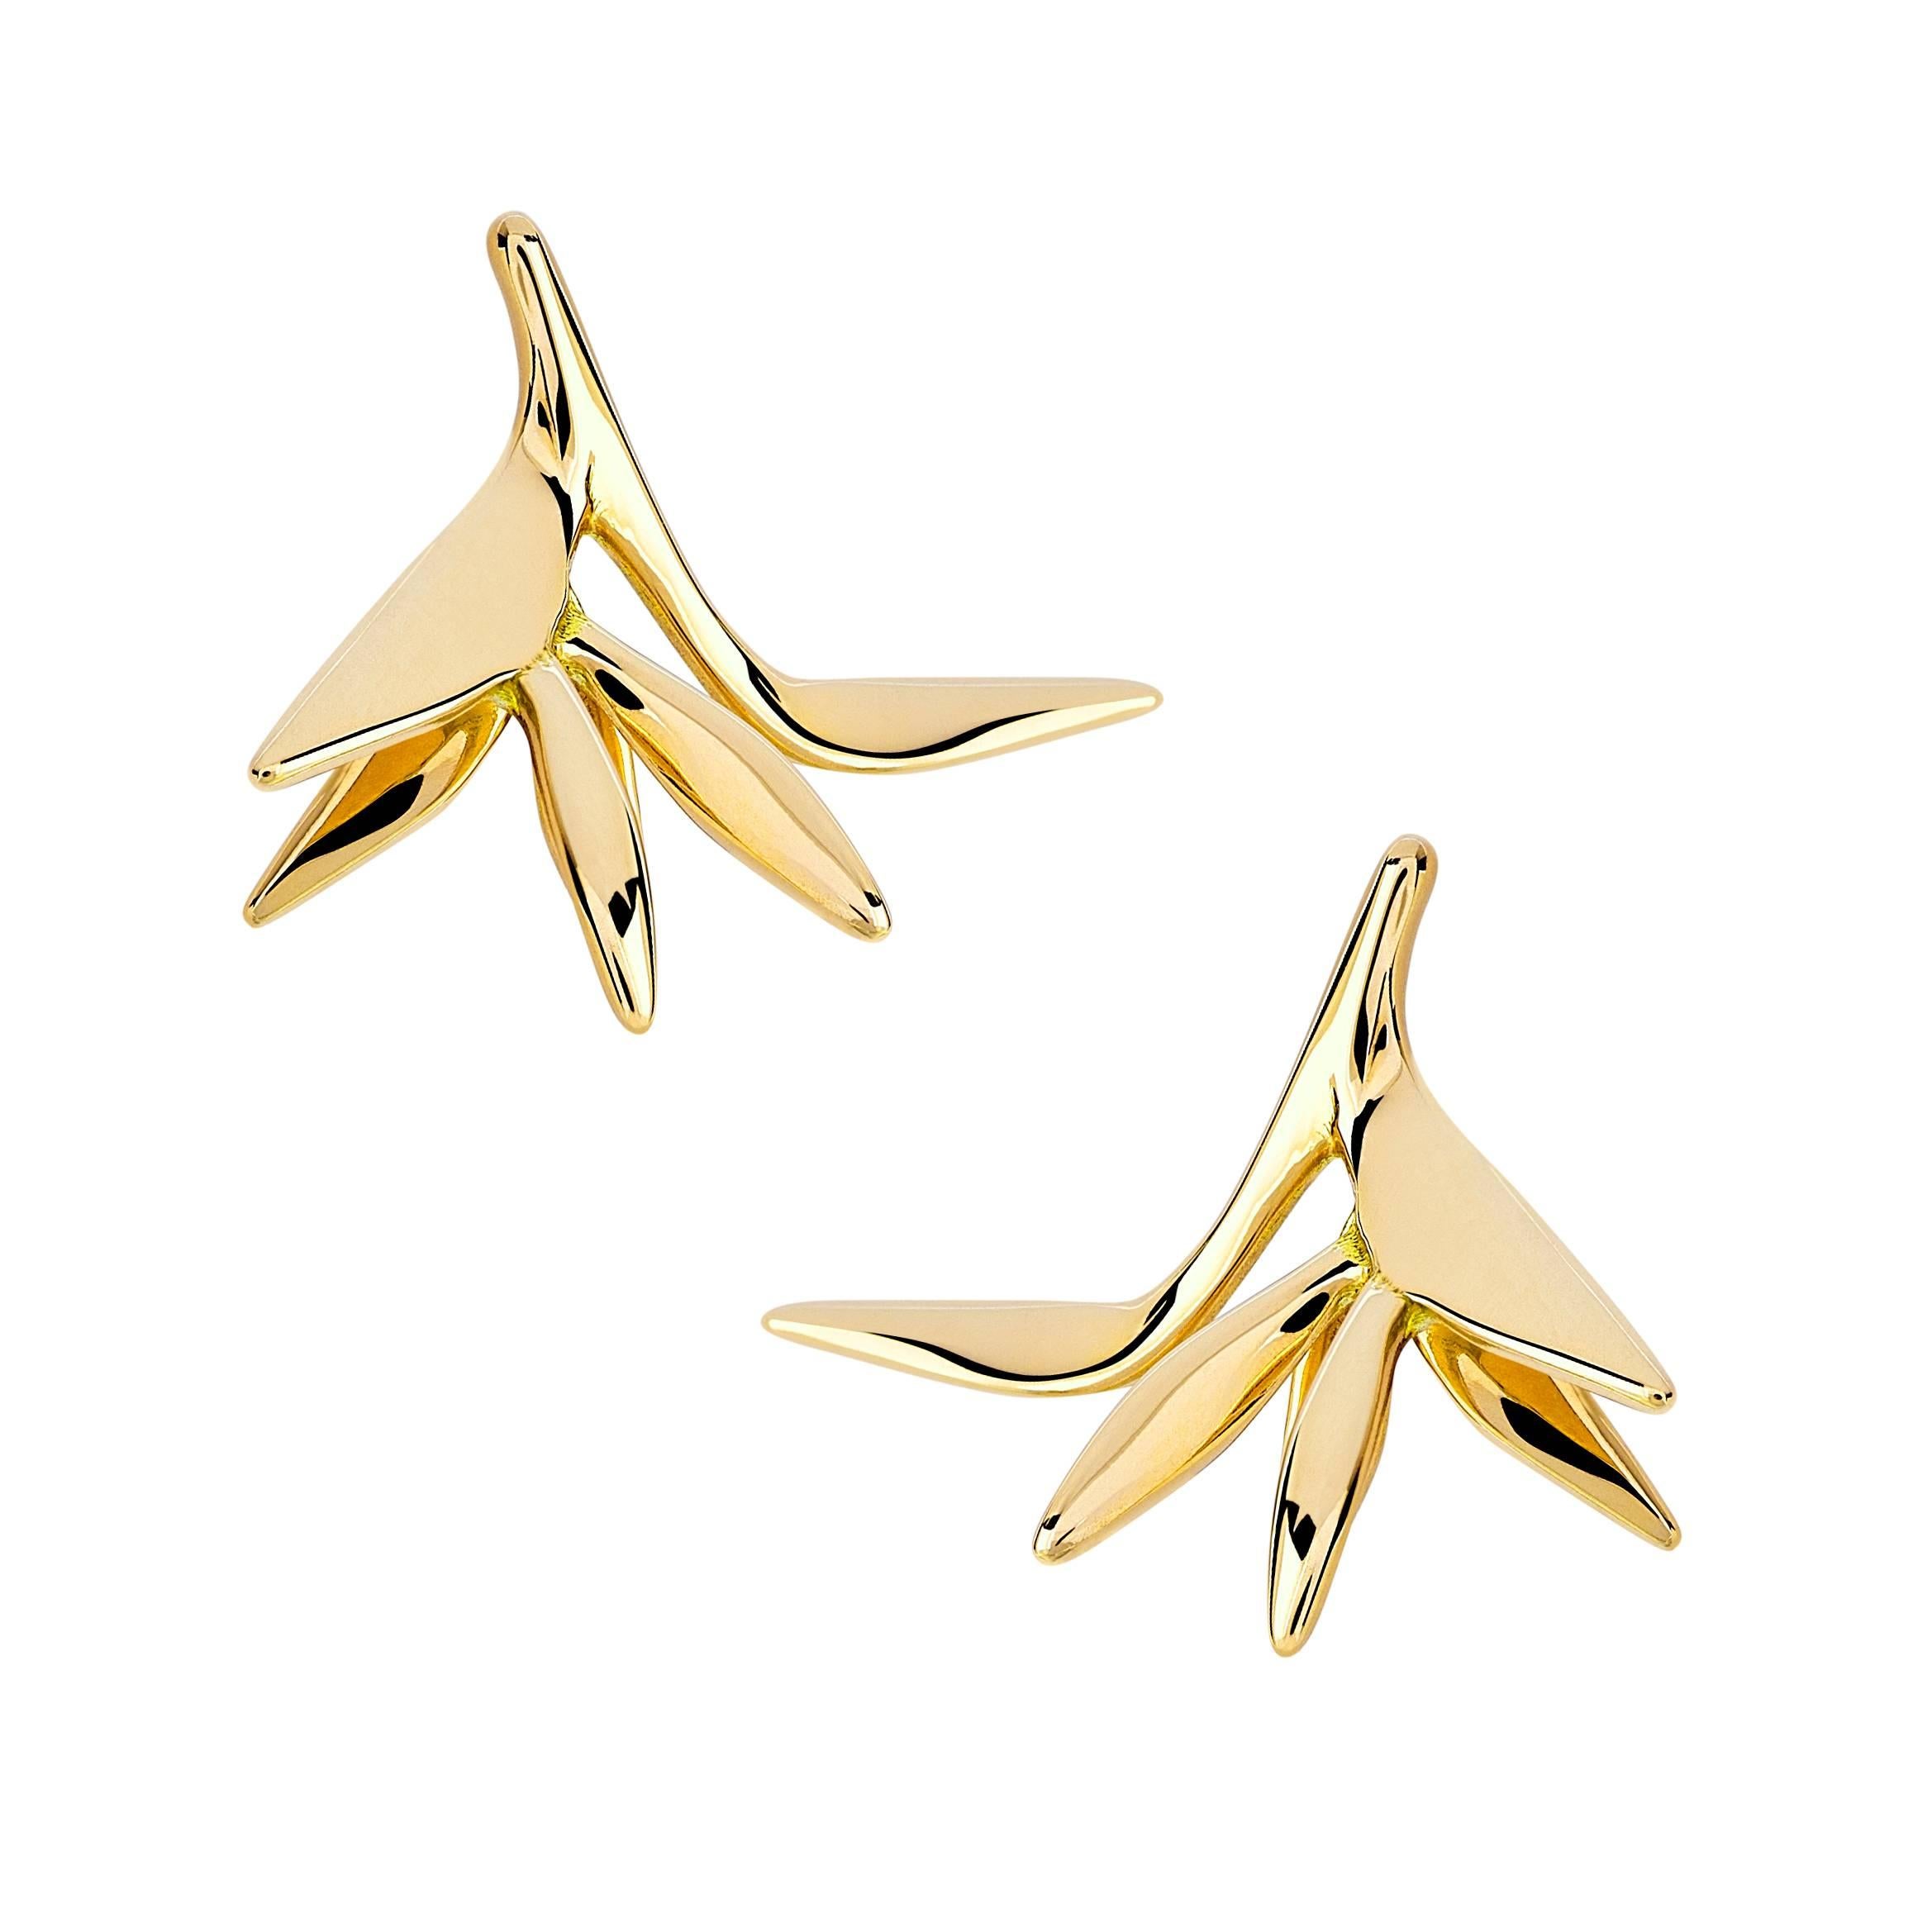 The Petite Bird of Paradise Earrings inherits its name from the tropical crane flower and are set in 18k Fairtrade yellow gold.